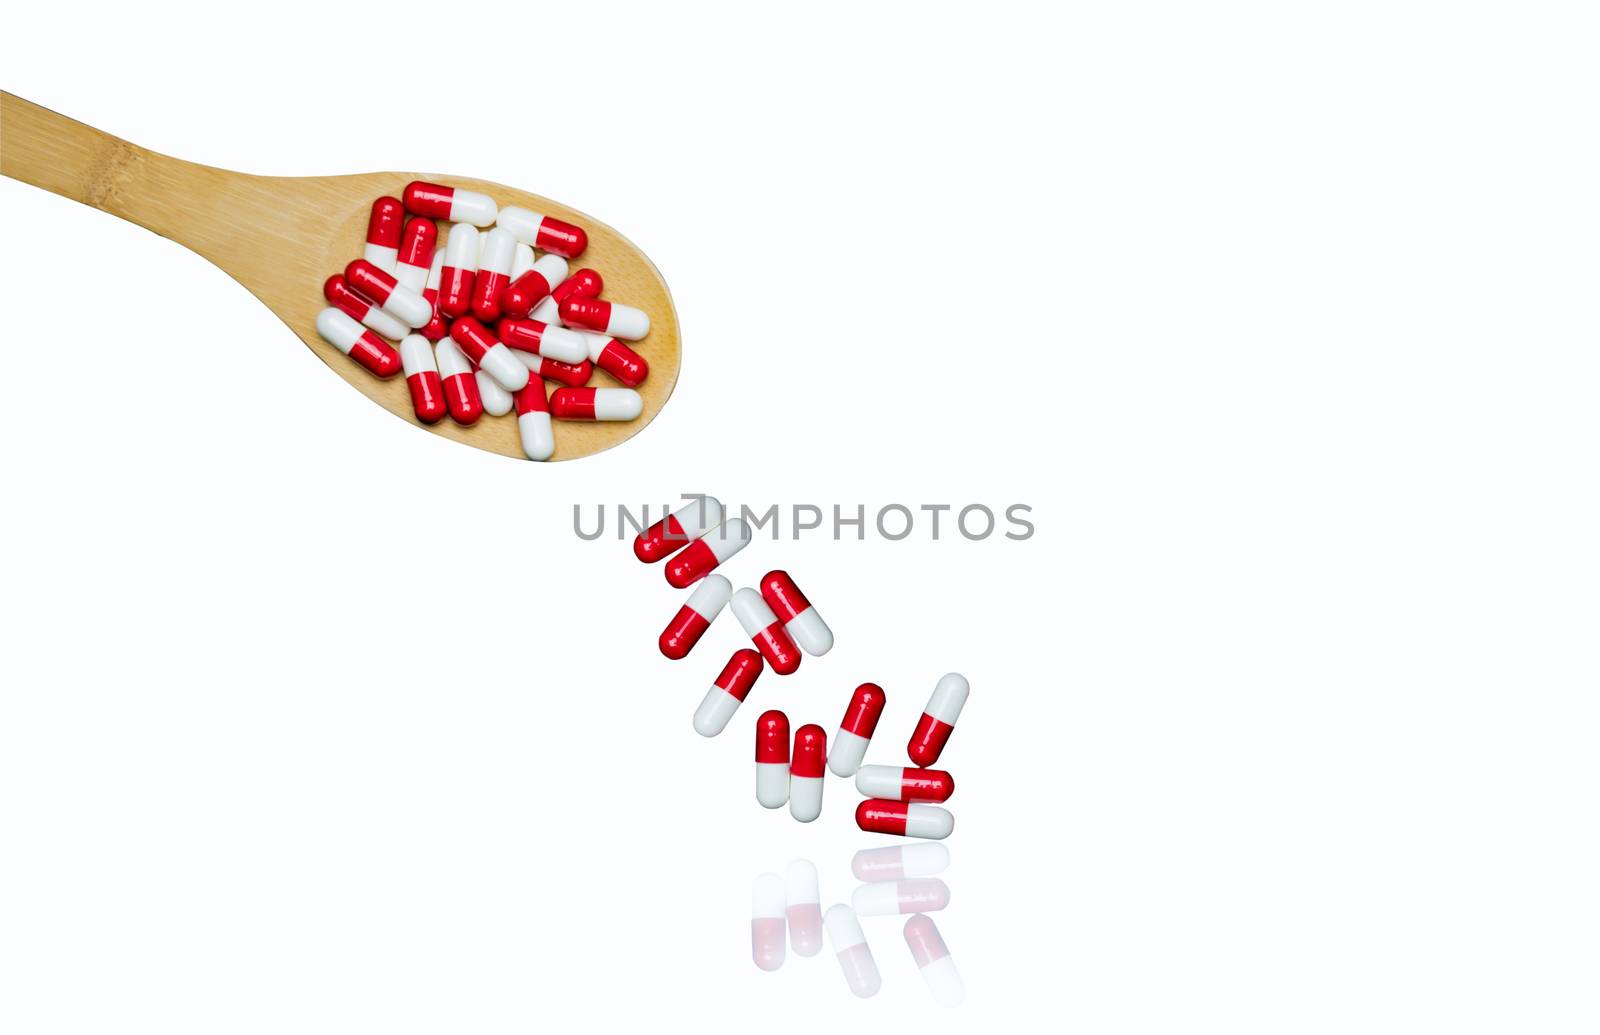 Colorful of antibiotics capsule pills in wooden spoon are spilling isolated on white background with copy space and clipping path. Antibiotic drug use with reasonable. Antibiotic overuse. Pharmaceutical industry. Pharmacy background. Health budgets and policy.